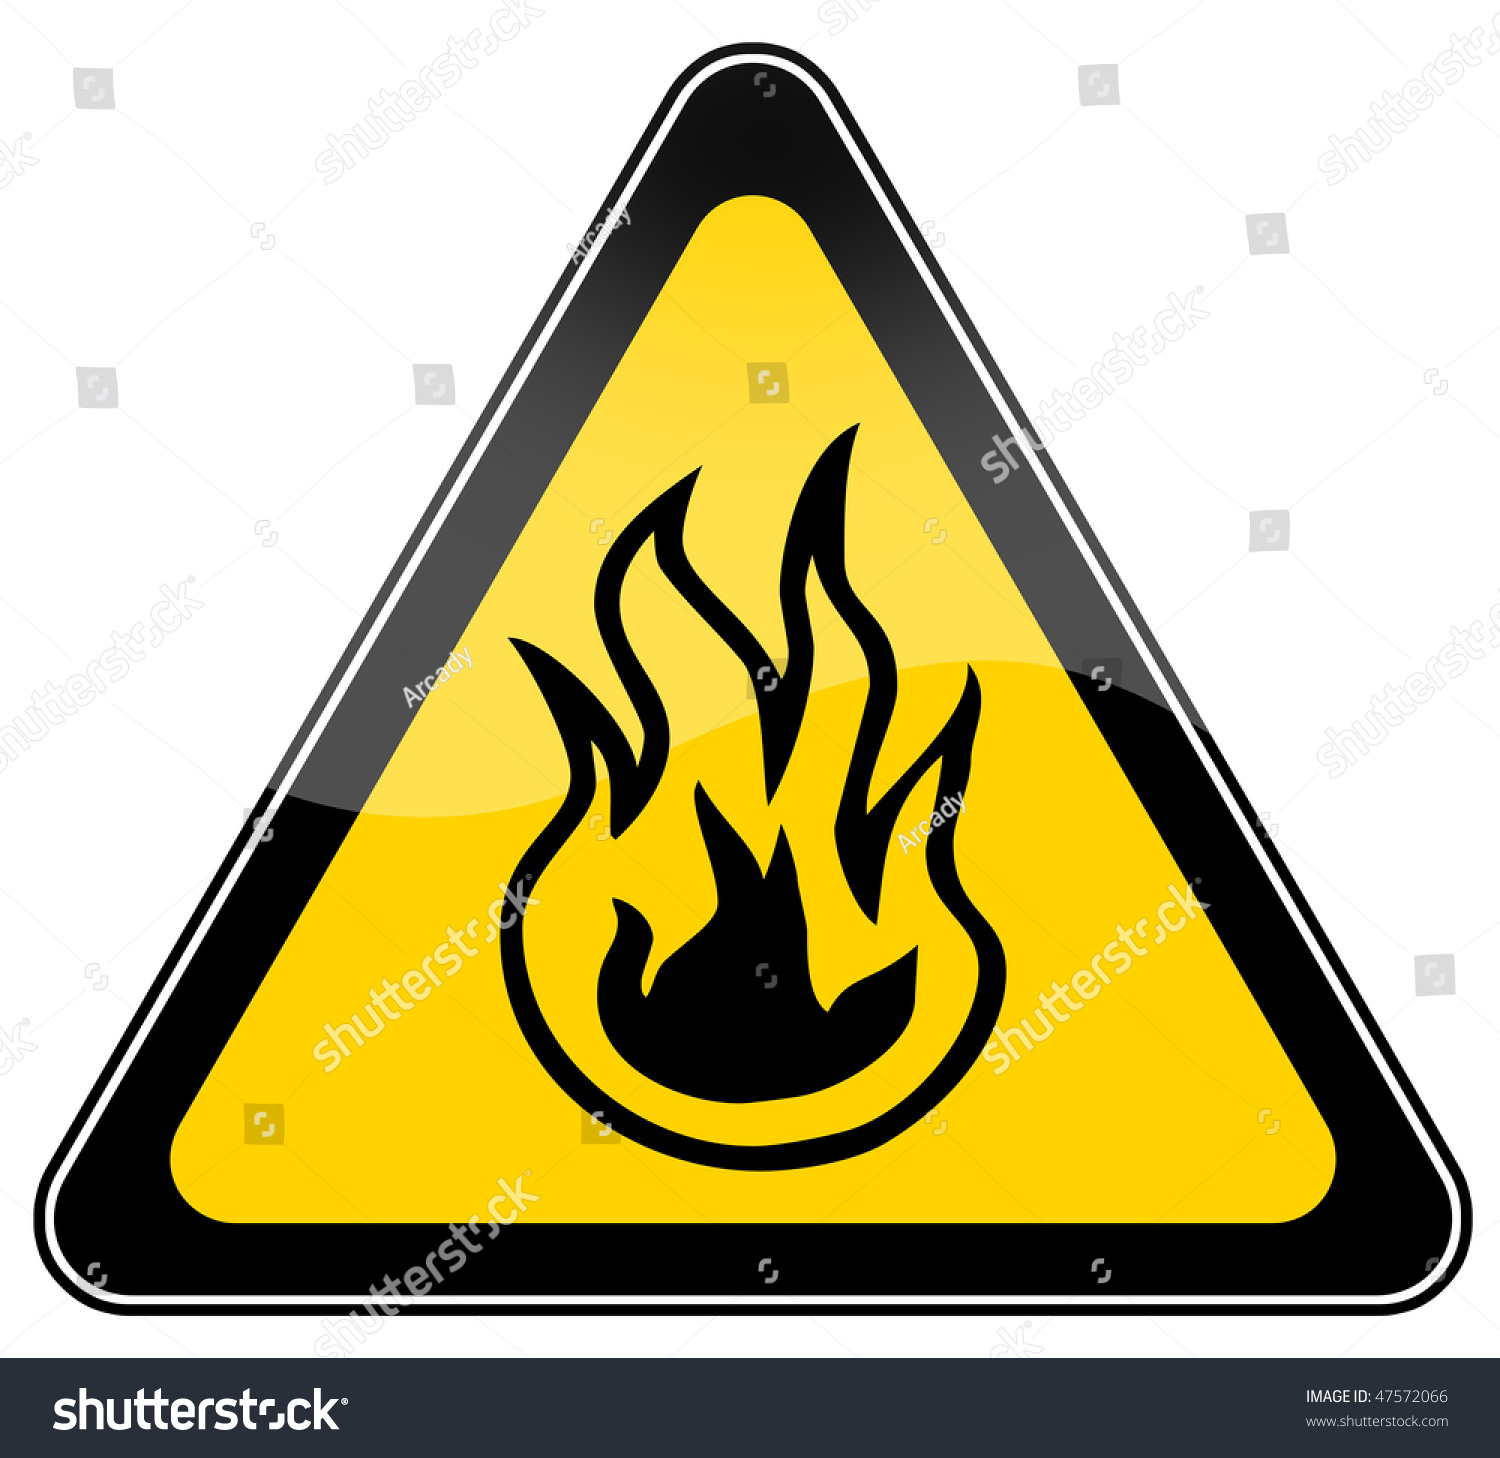 Combustible Material Warning Sign Stock Photo 47572066 : Shutterstock